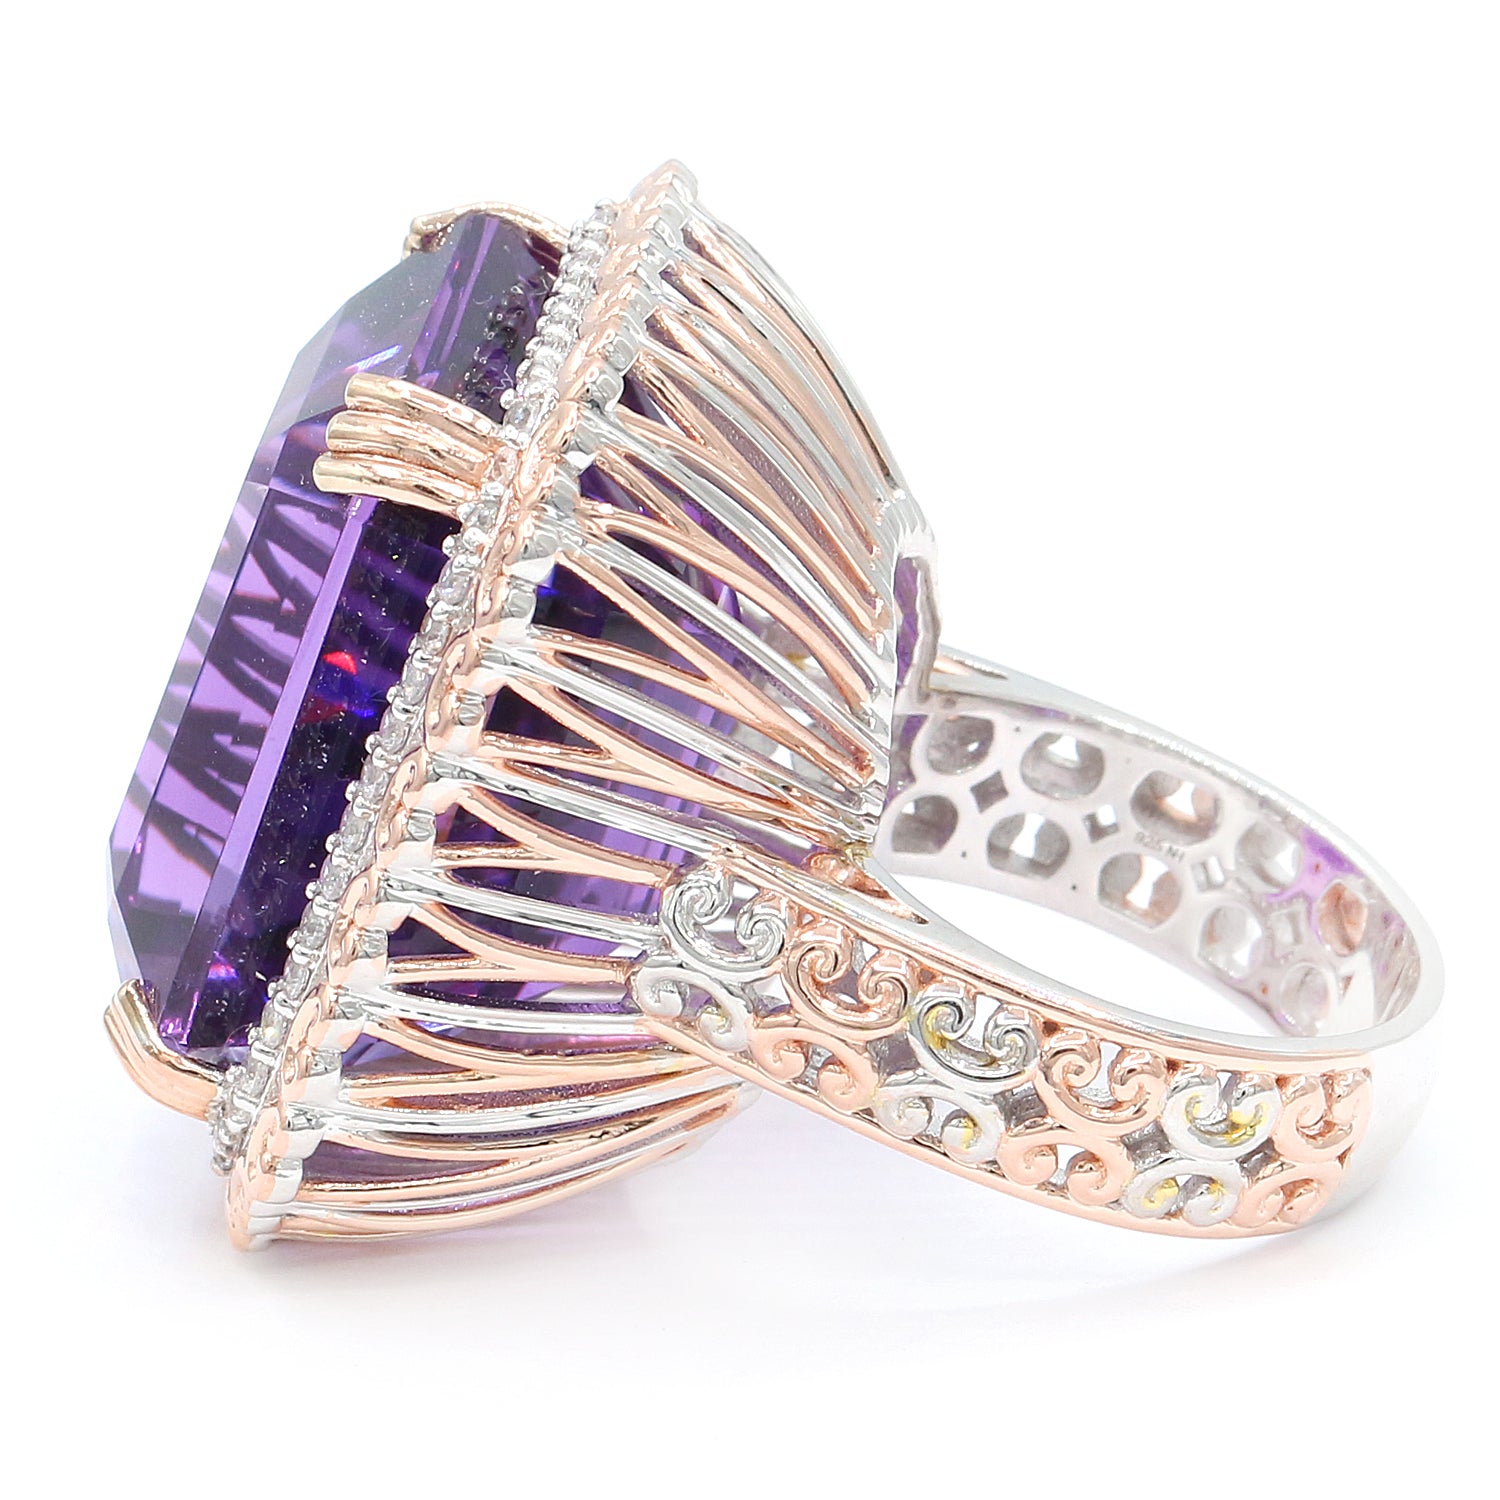 Limited Edition Gems en Vogue One-of-a-Kind 49.20ctw Namibian Amethyst & White Zircon Halo Honker Ring